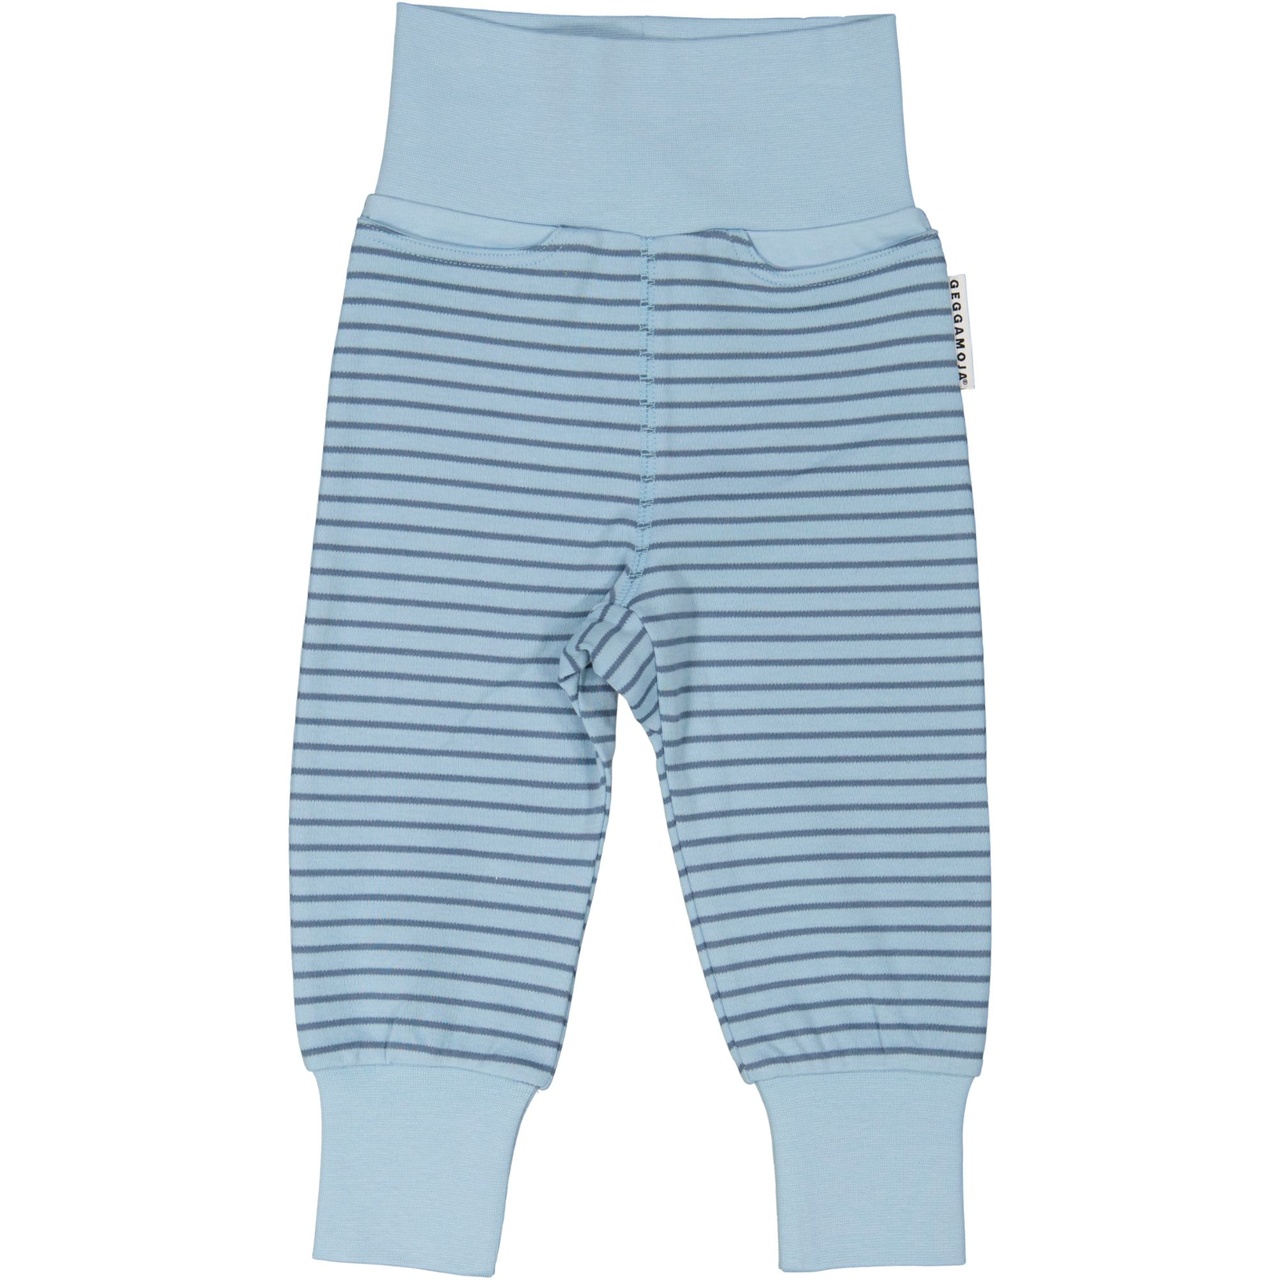 Baby trousers L.blue/blue86/92